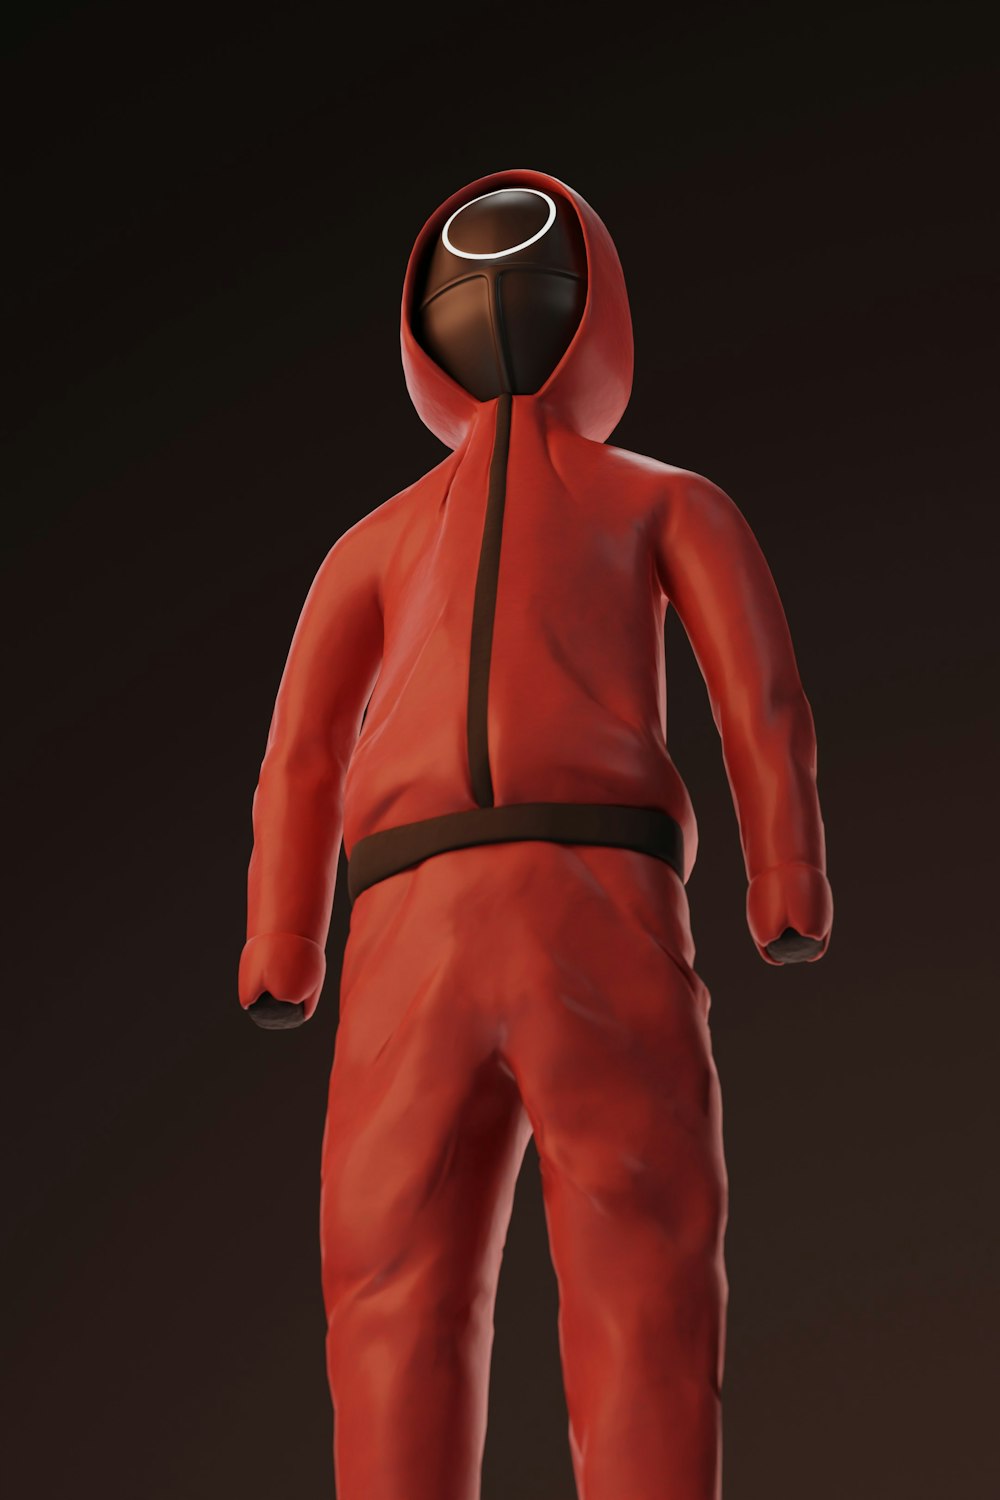 a person in a red suit with a helmet on